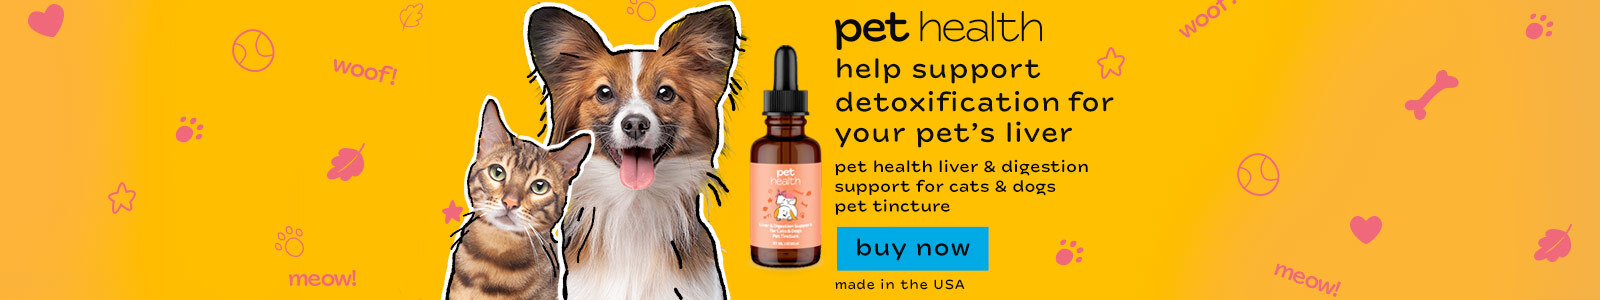 Pet Health Liver & Digestion Support for Cats & Dogs Pet Tincture Help support detoxification for your pet’s liver Buy Now Made in the USA